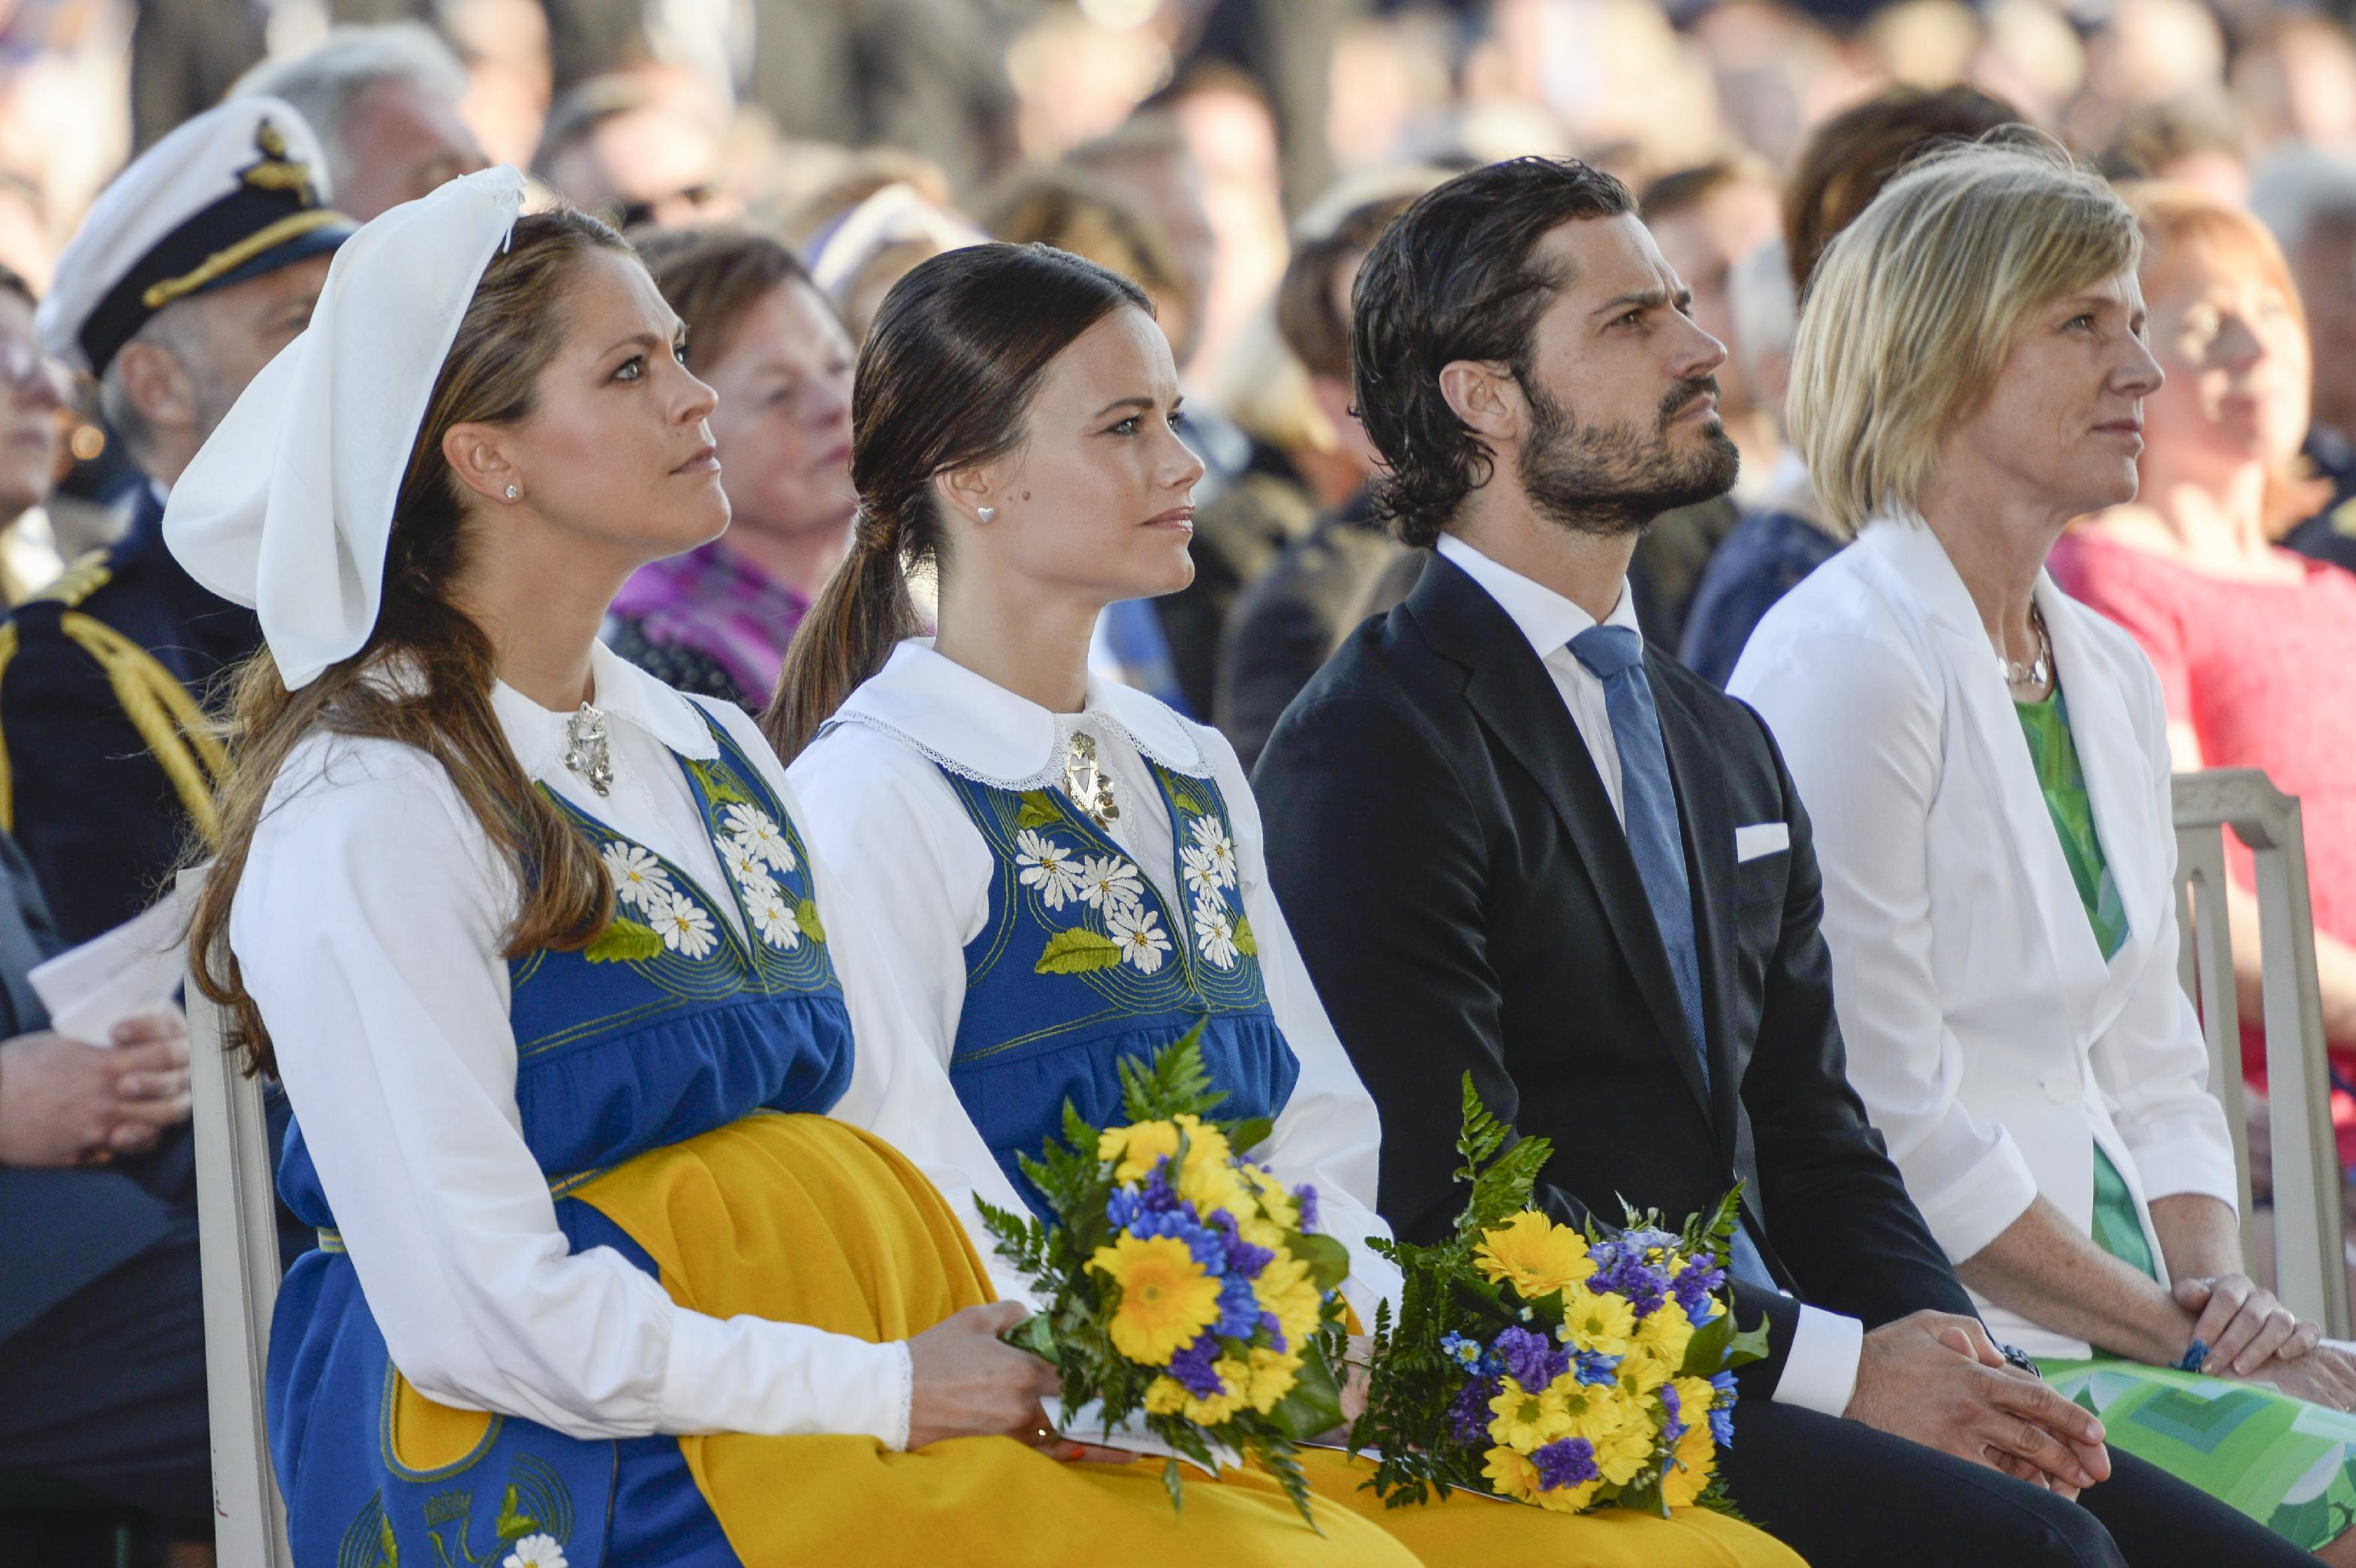 From left: Sweden's Princess Madeleine, Sofia Hellqvist and her husband, soon-to-be Prince Carl Philip, and wife of Parliamentary speaker, Jenni Ahlin  during National Day of Sweden celebrations in Stockholm Saturday June 6, 2015. (Janerik Henriksson/TT via AP)   SWEDEN OUT